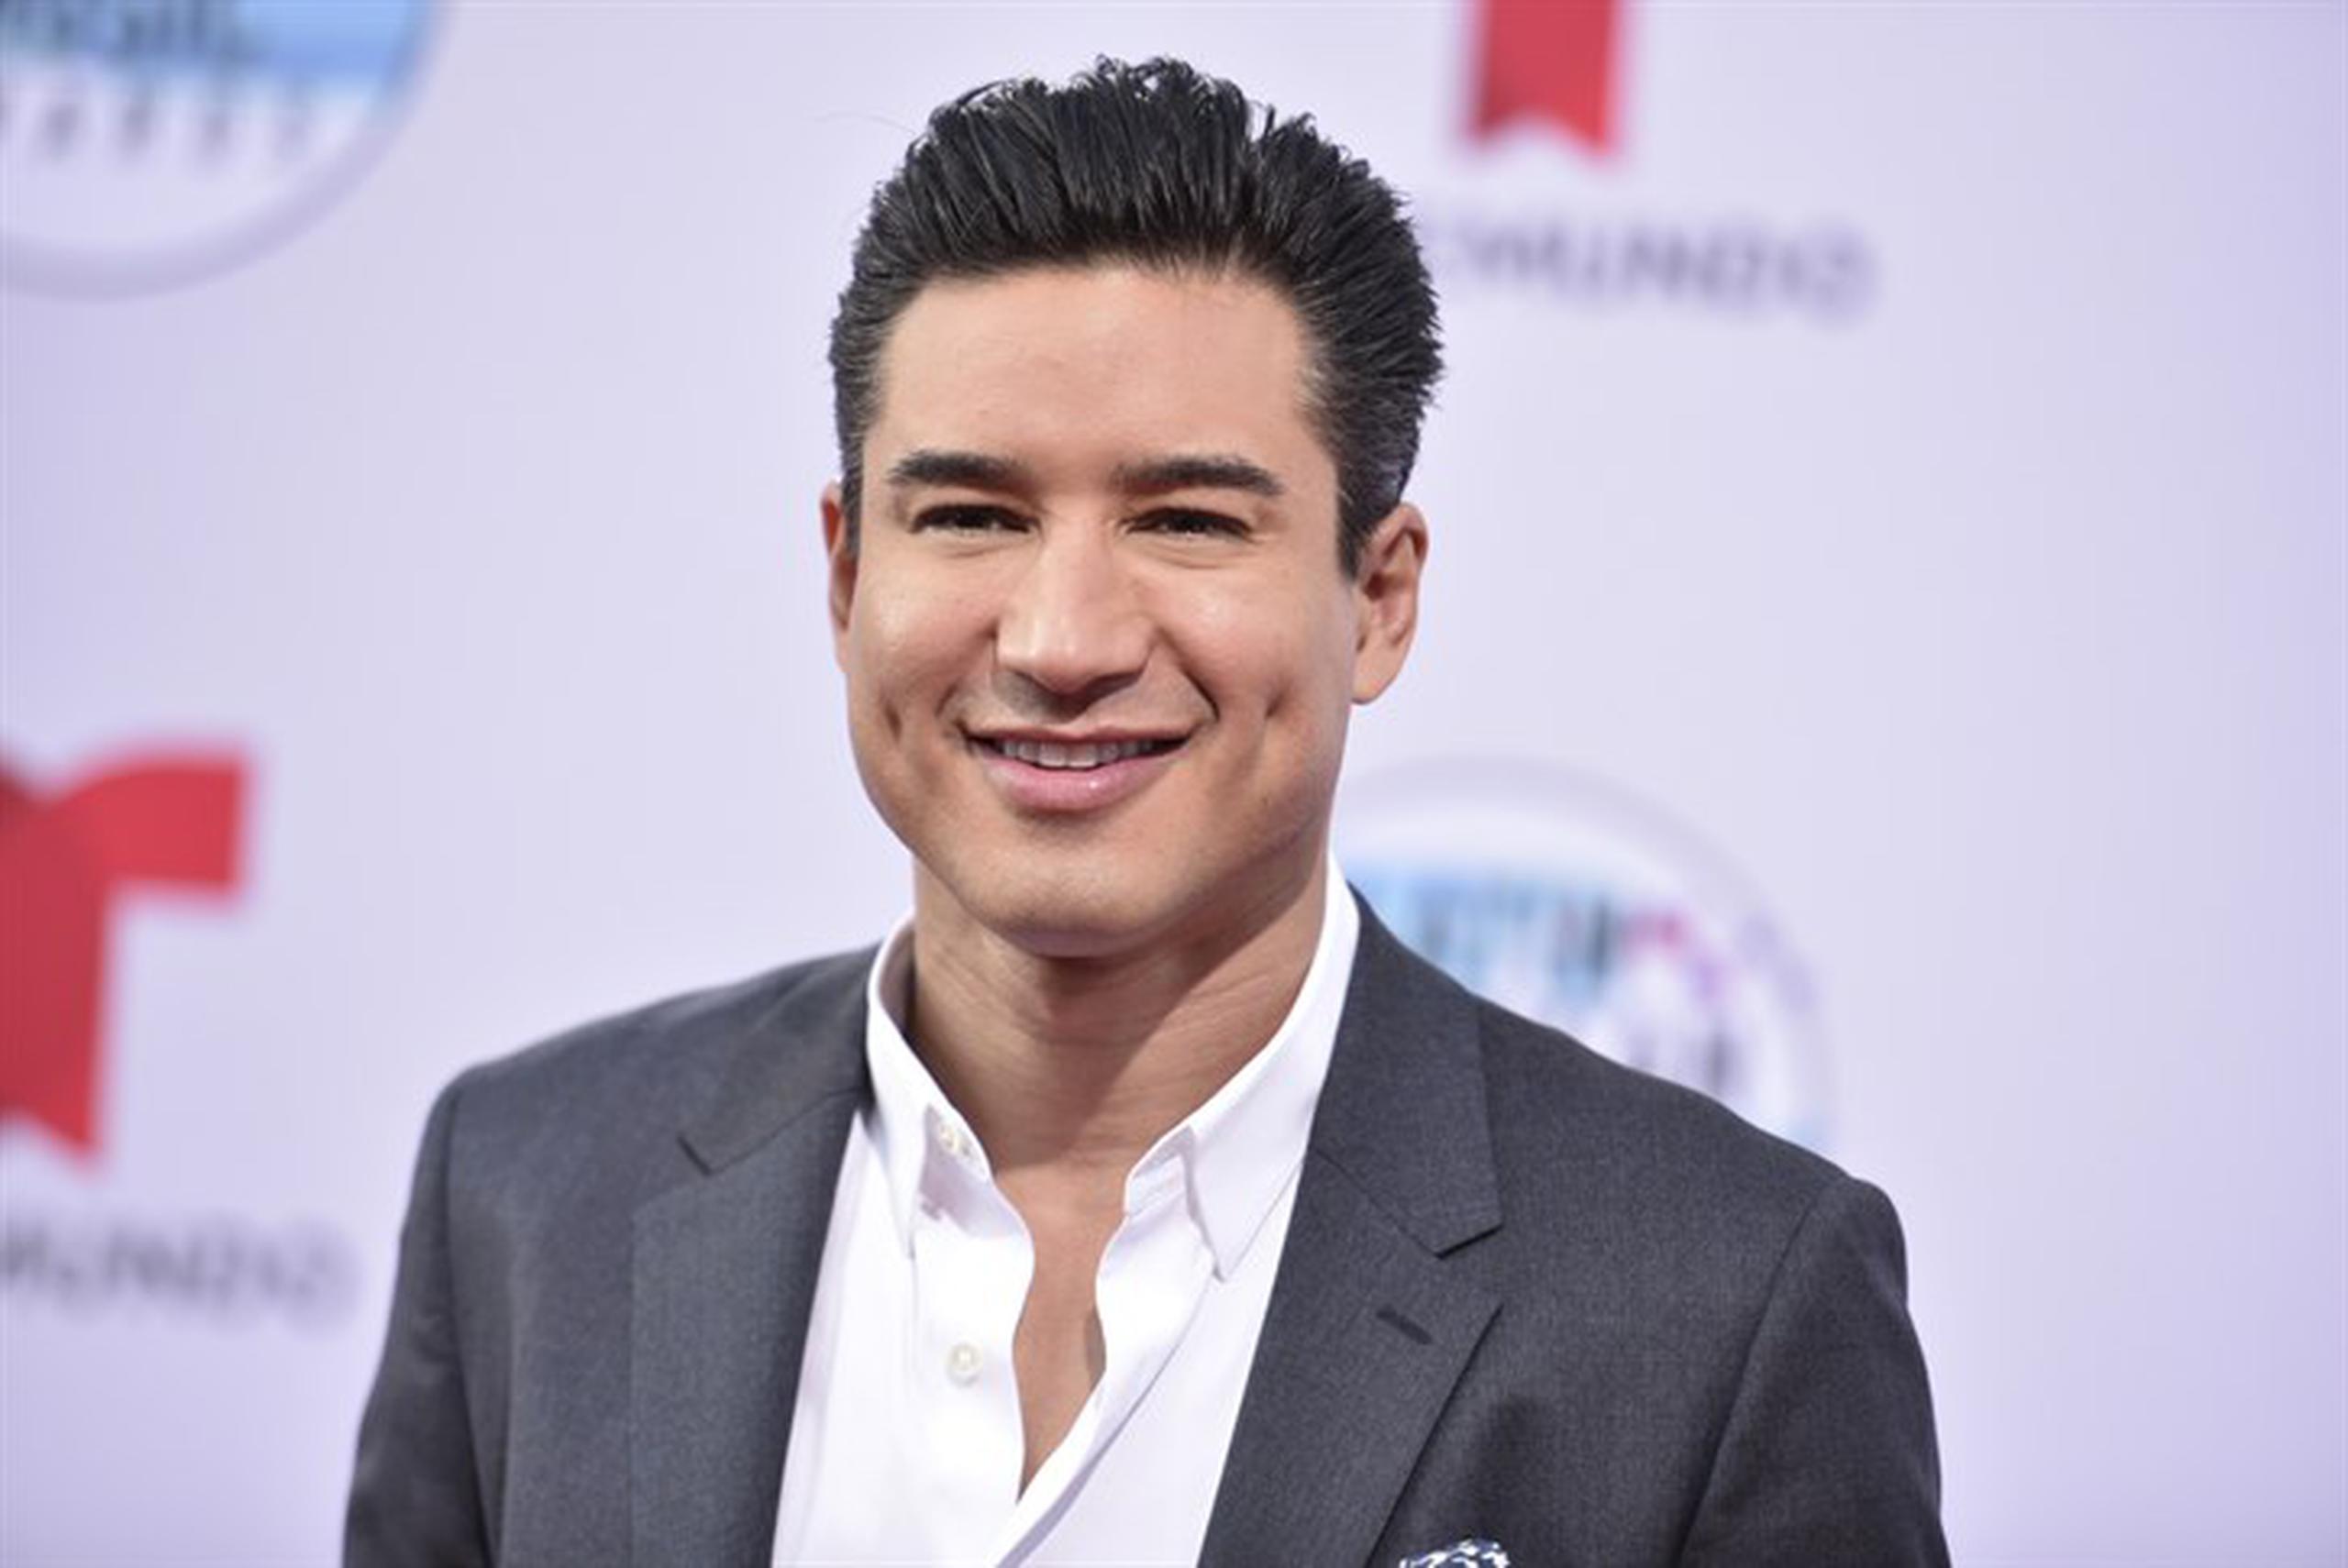 Mario Lopez (Photo by Richard Shotwell/Invision/AP)